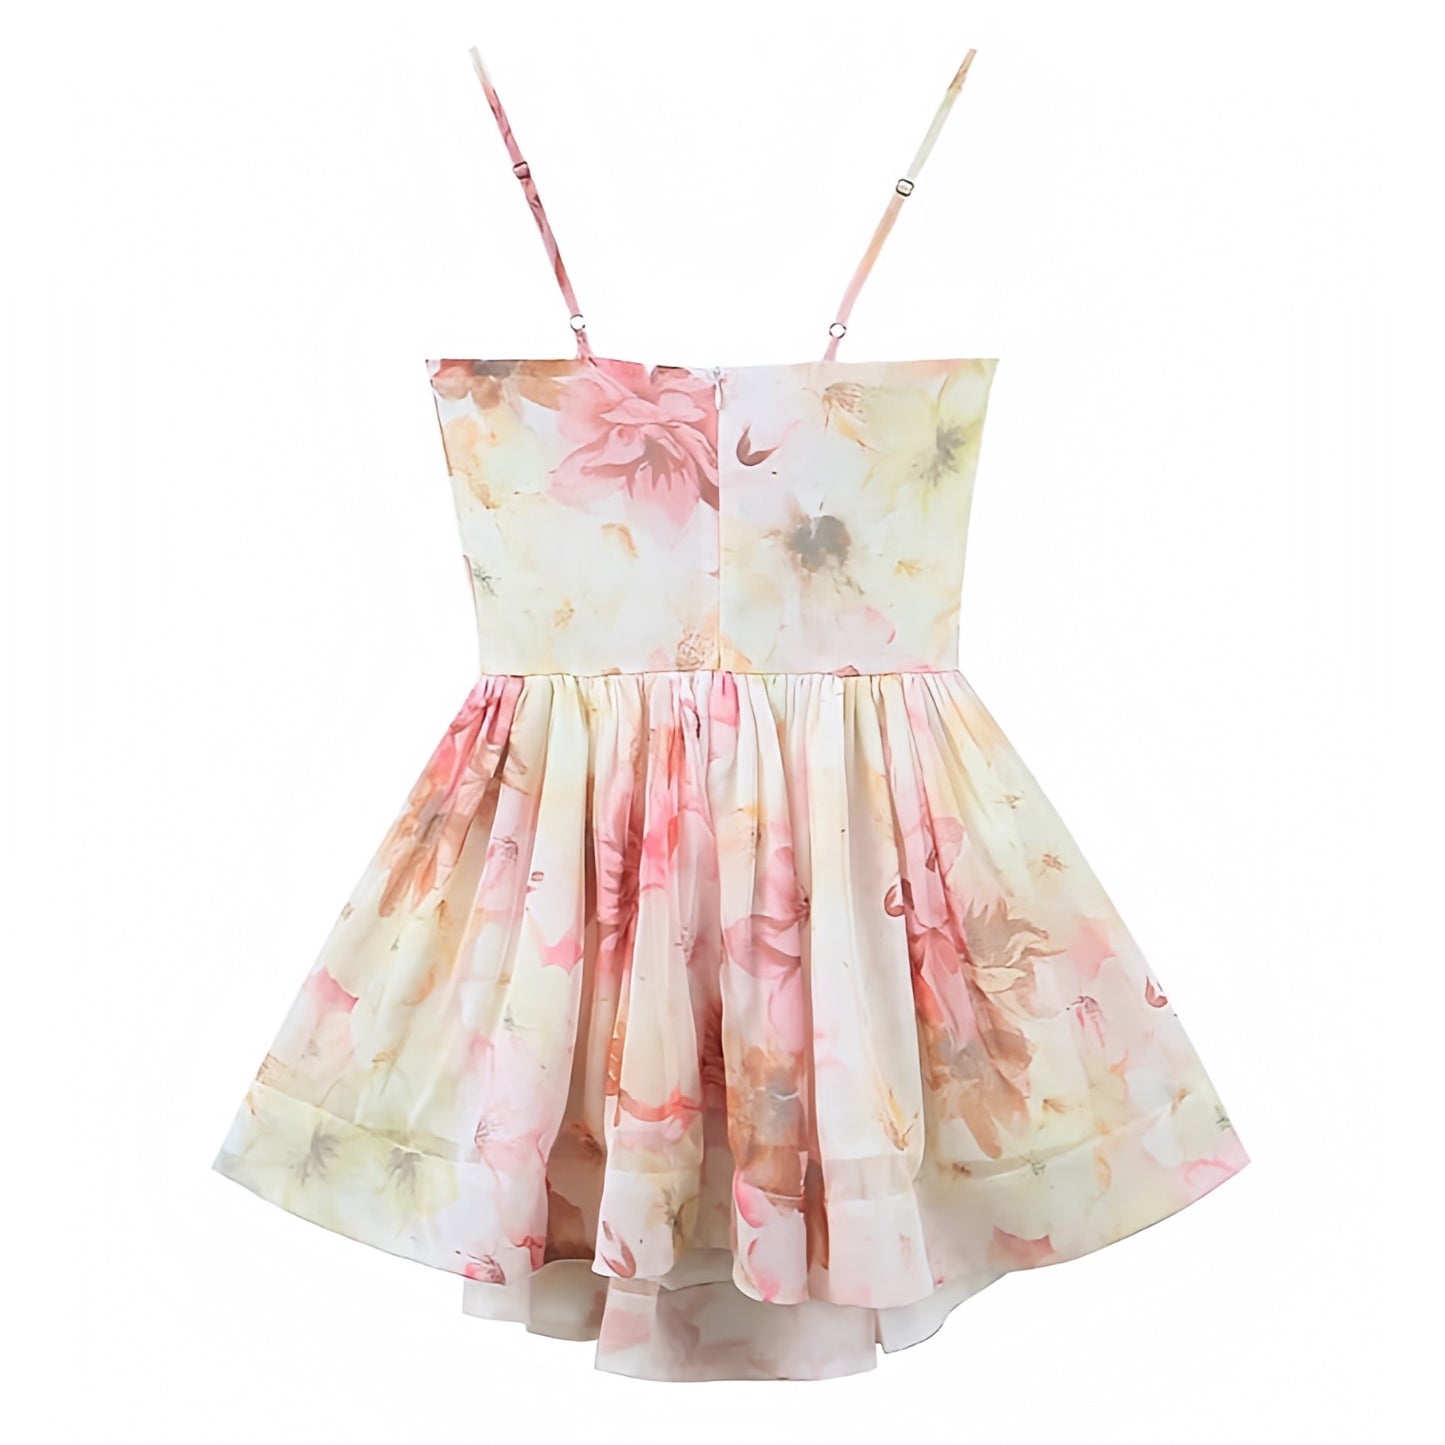 floral-print-light-pink-yellow-white-multi-color-flower-patterned-corset-bustier-bodycon-slim-fitted-bodice-drop-waist-layered-ruffle-trim-spaghetti-strap-sleeveless-backless-open-back-fit-and-flare-bubble-balloon-short-mini-dress-gown-women-ladies-chic-trendy-spring-2024-summer-elegant-semi-formal-casual-feminine-classy-tea-party-prom-gala-preppy-style-wedding-guest-sunday-brunch-beach-vacation-evening-cocktail-sundress-altard-state-revolve-princess-polly-zara-hello-molly-urban-outfitters-whitefox